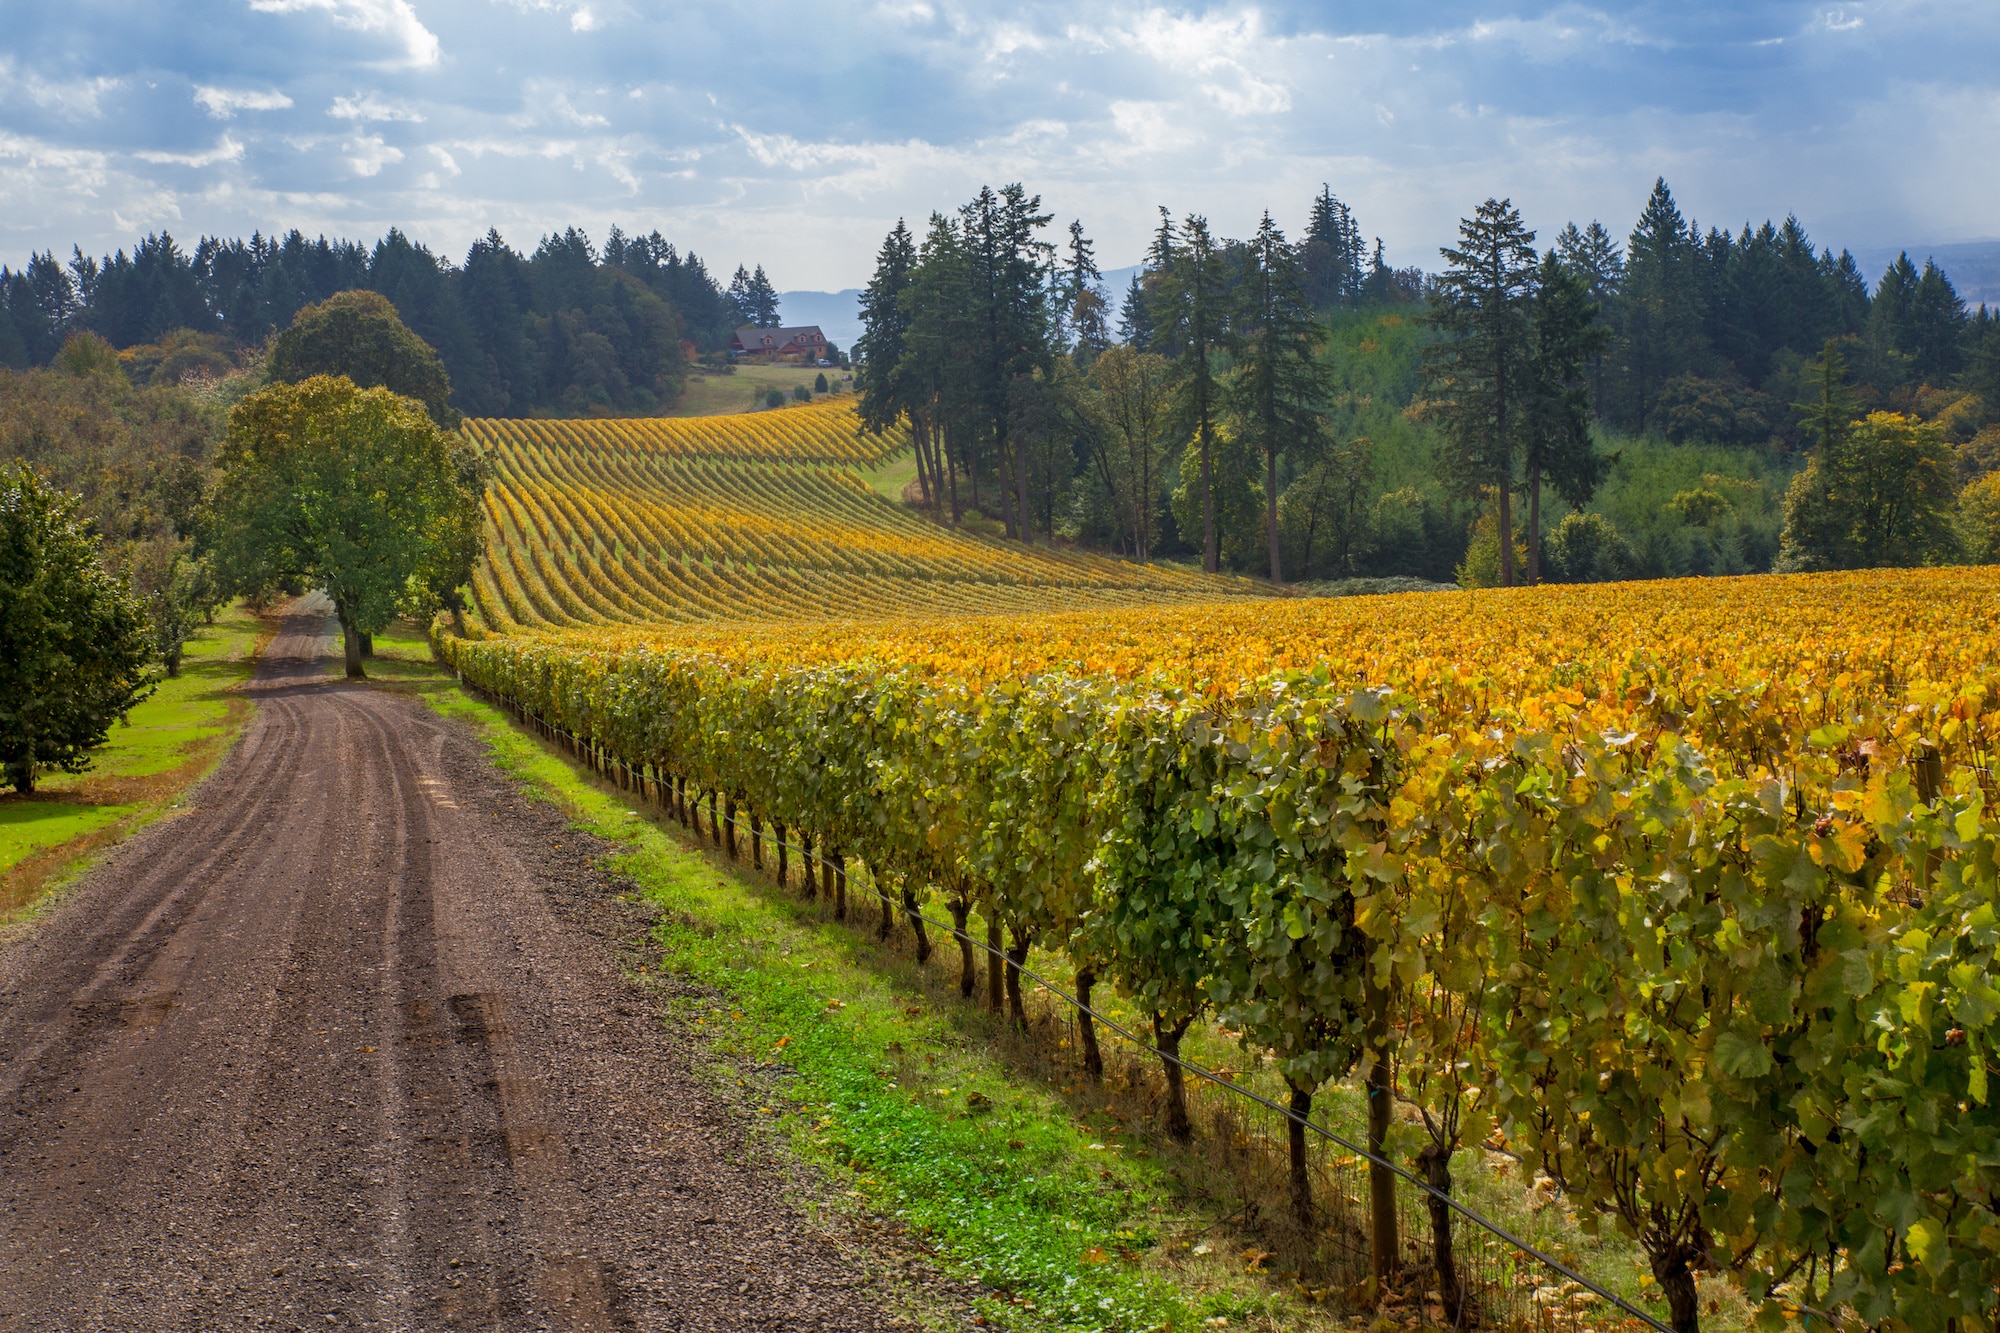 oregon vineyard in willamette valley. a picturesque view of a vineyard in oregon show's that it's almost time to start harvesting the wine grapes in the fall season.